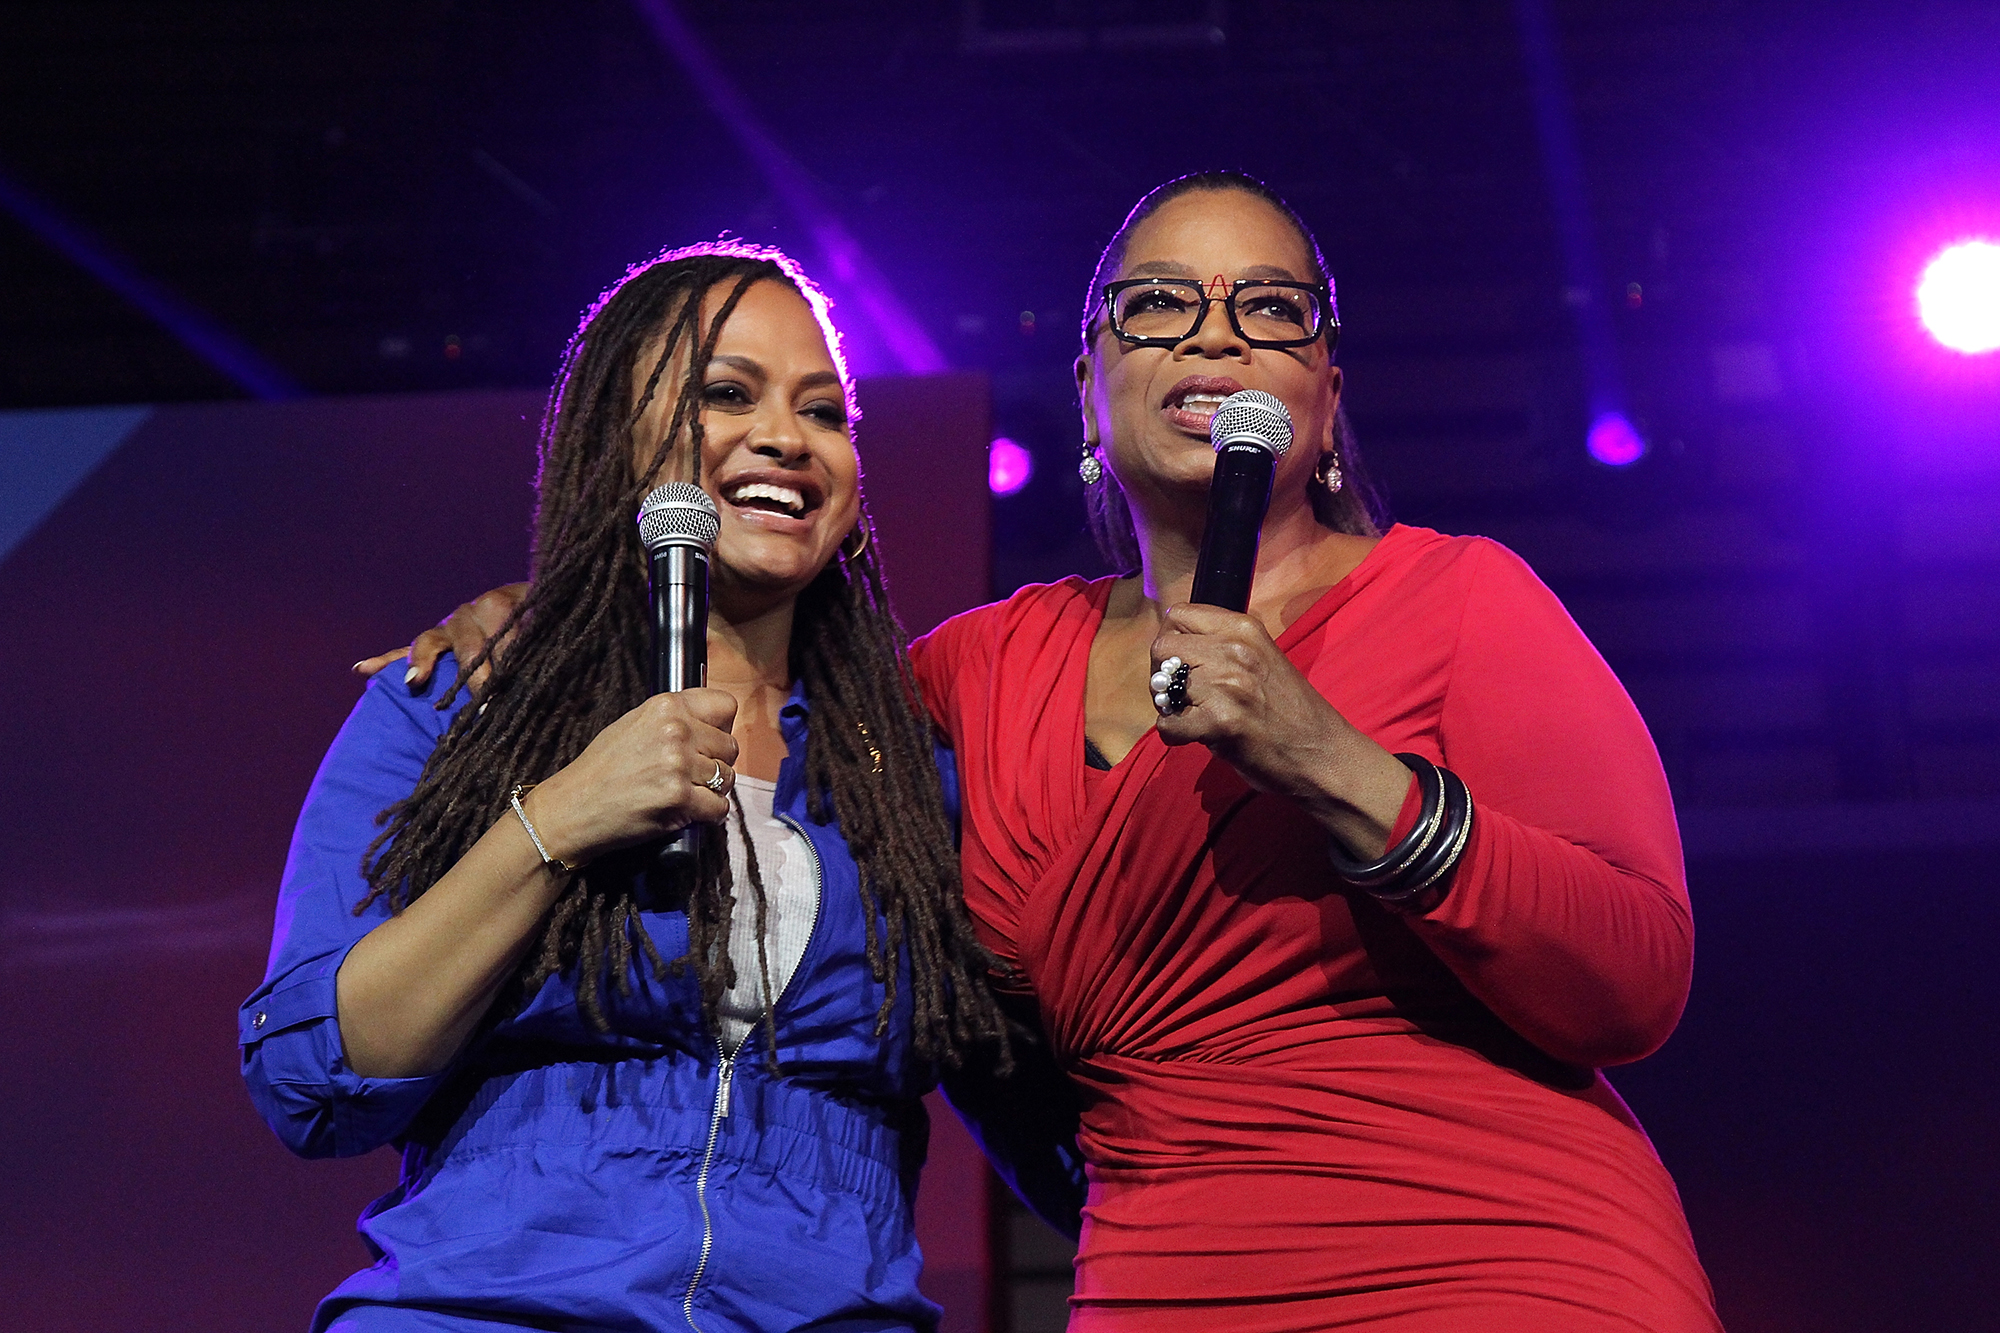 Ava DuVernay and Oprah Winfrey attend the 2016 Essence Festival - Day 2 at Ernest N. Morial Convention Center on July 1, 2016 in New Orleans, Louisiana.  (Photo by Bennett Raglin/WireImage) (Bennett Raglin—WireImage)